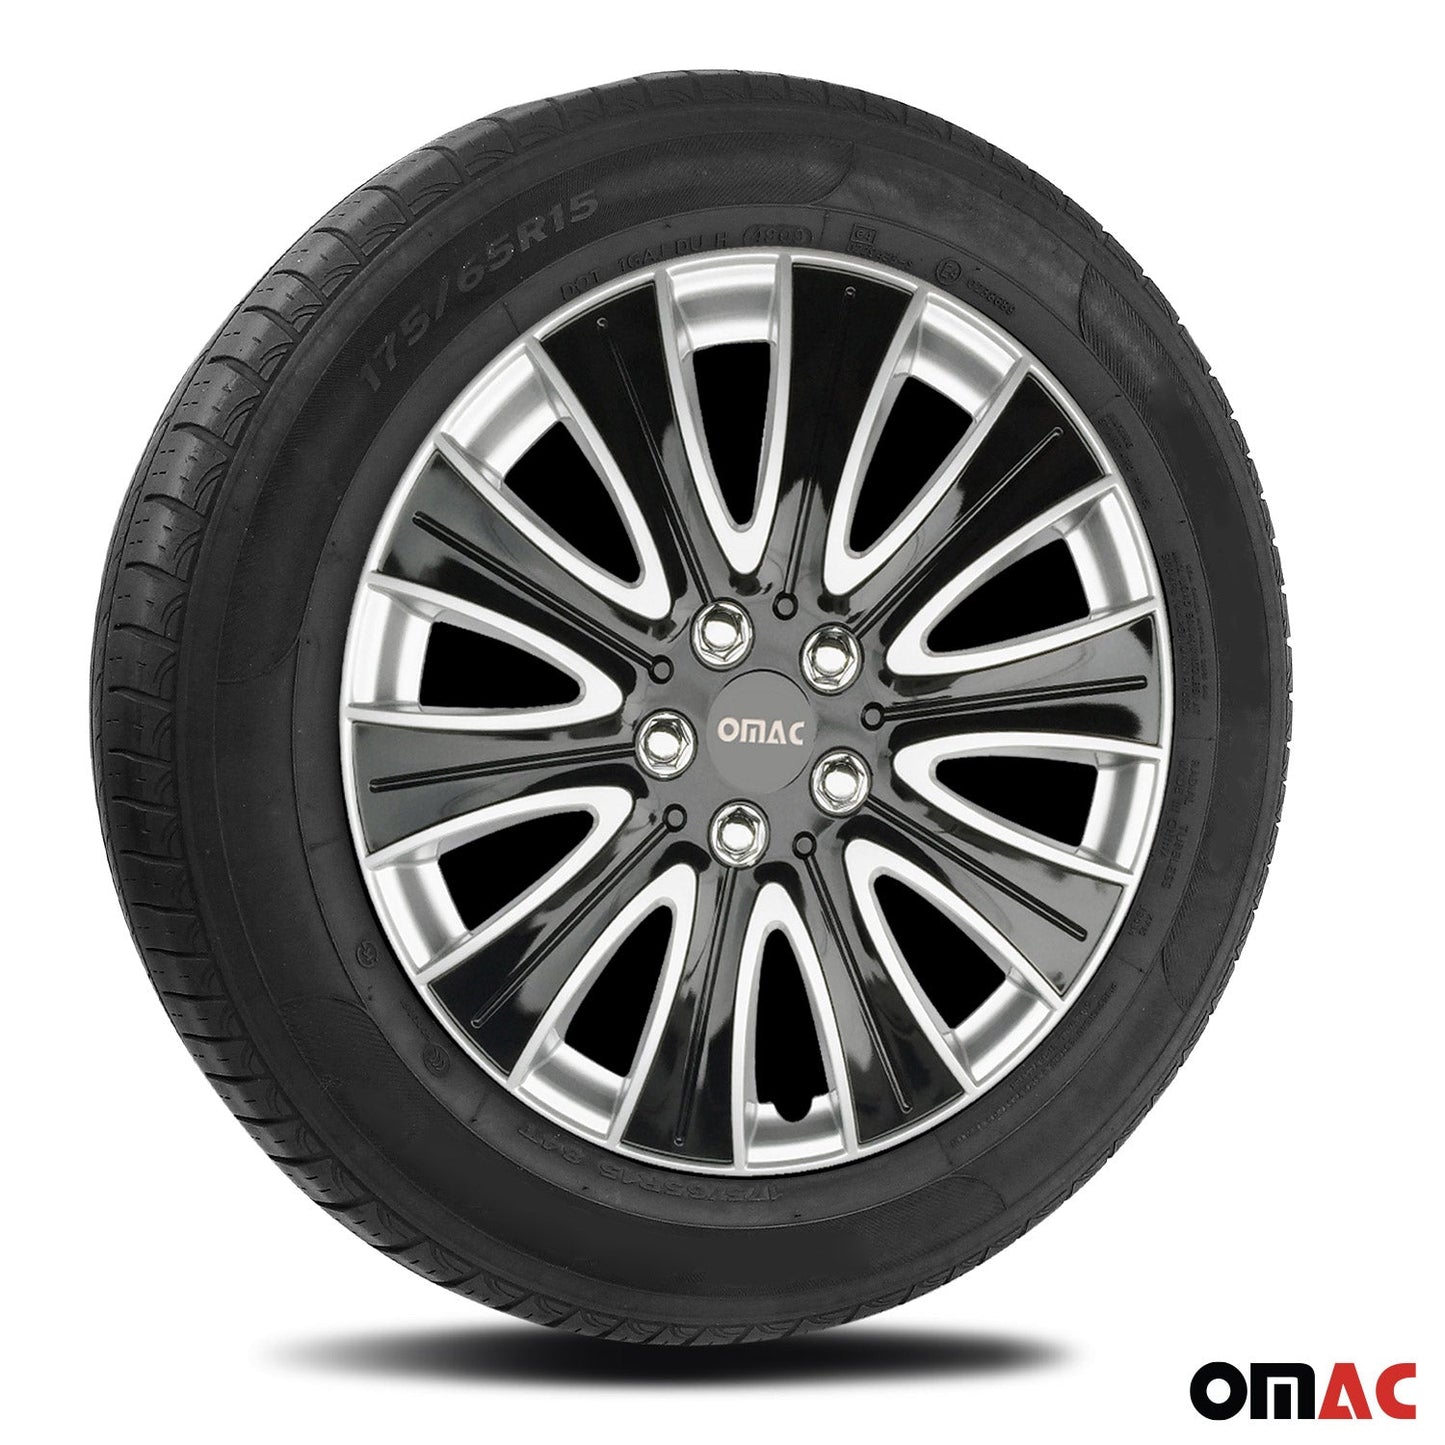 OMAC 14" Wheel Covers Guard Hub Caps Durable Snap On ABS Accessories Black Silver 4x OMAC-WE40-SVBK14